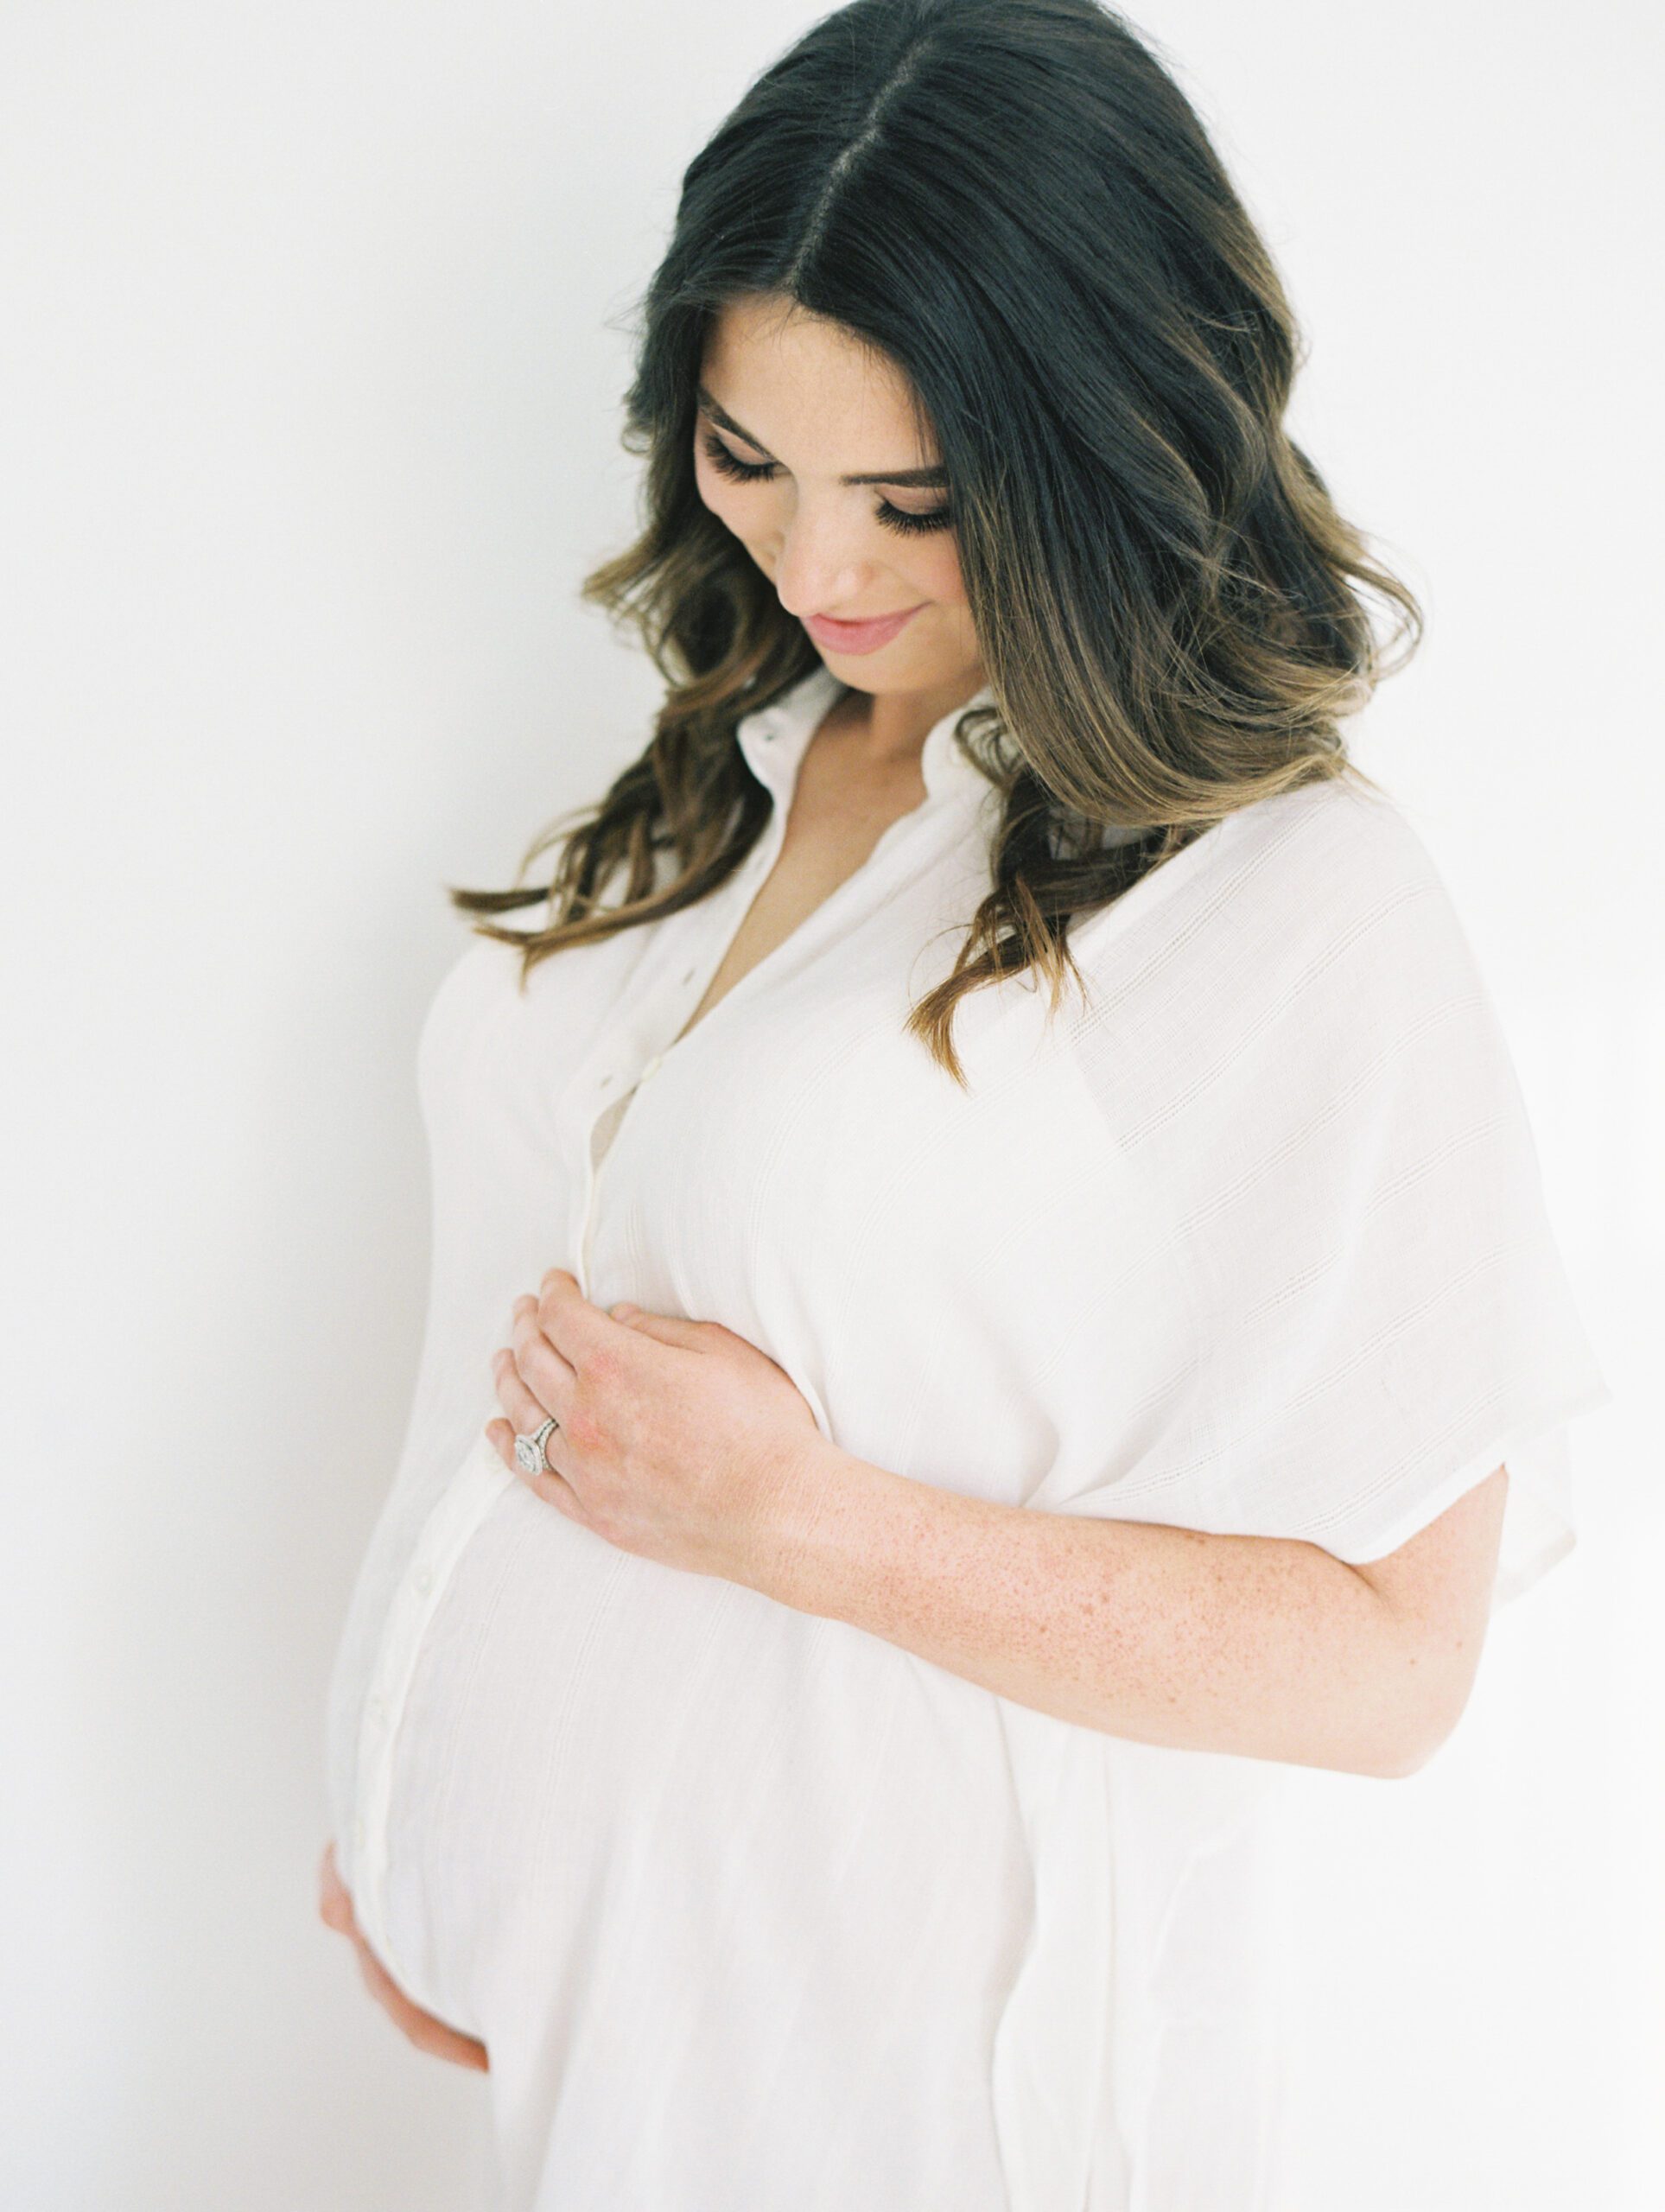 Maternity photography indoor